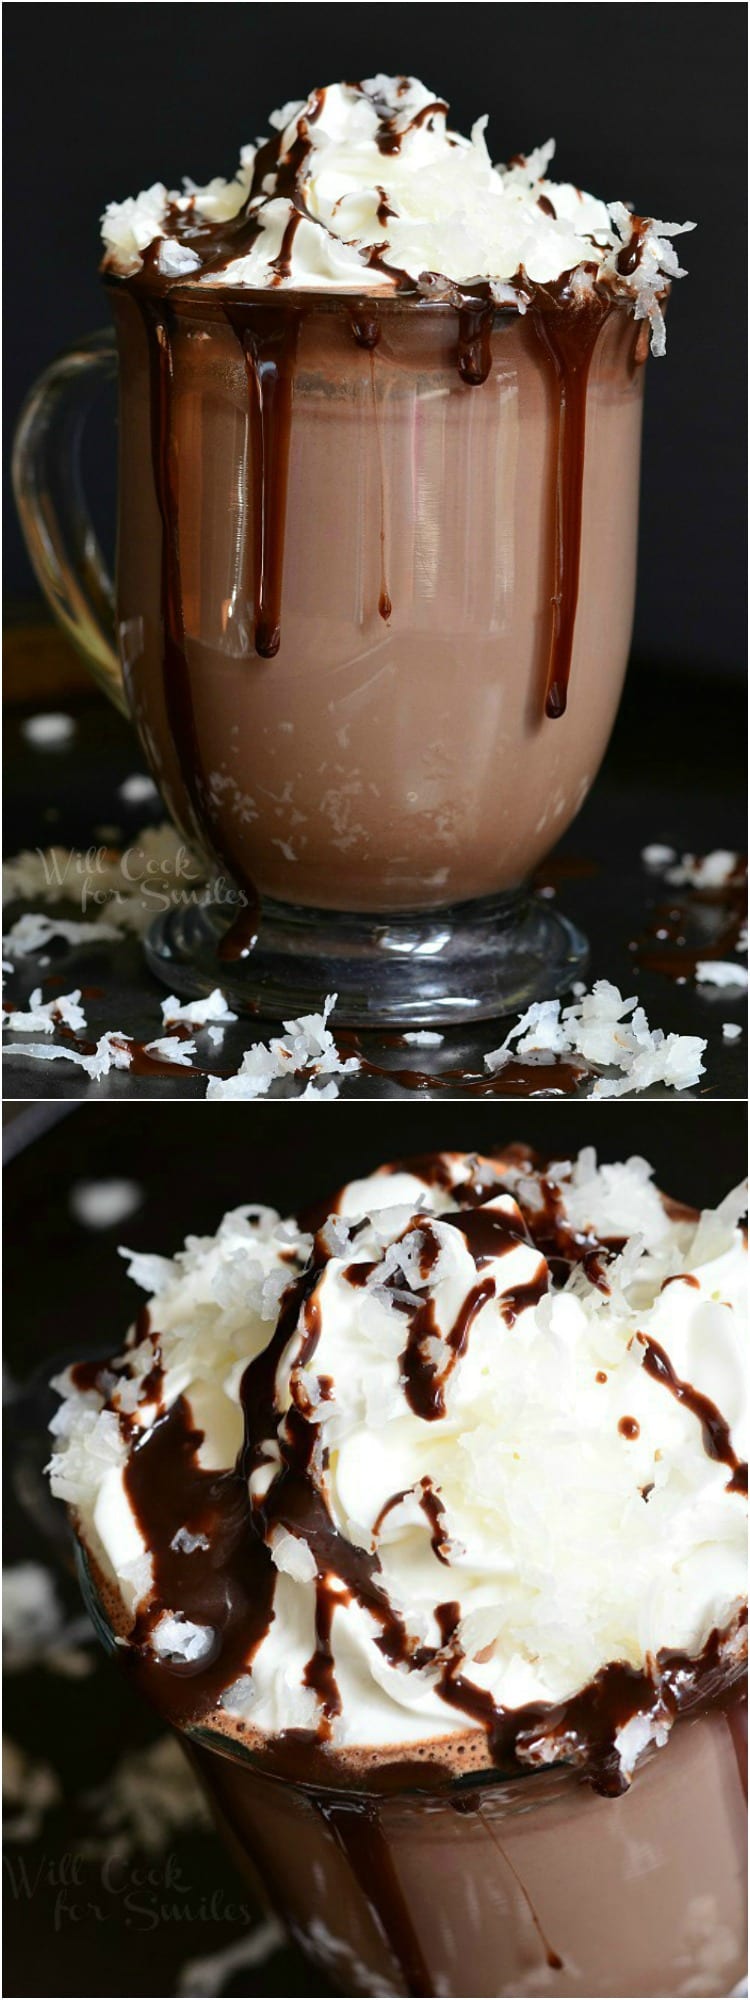 Hot Chocolate in a clear glass with whipped cream, chocolate sauce, and shredded coconut on top  